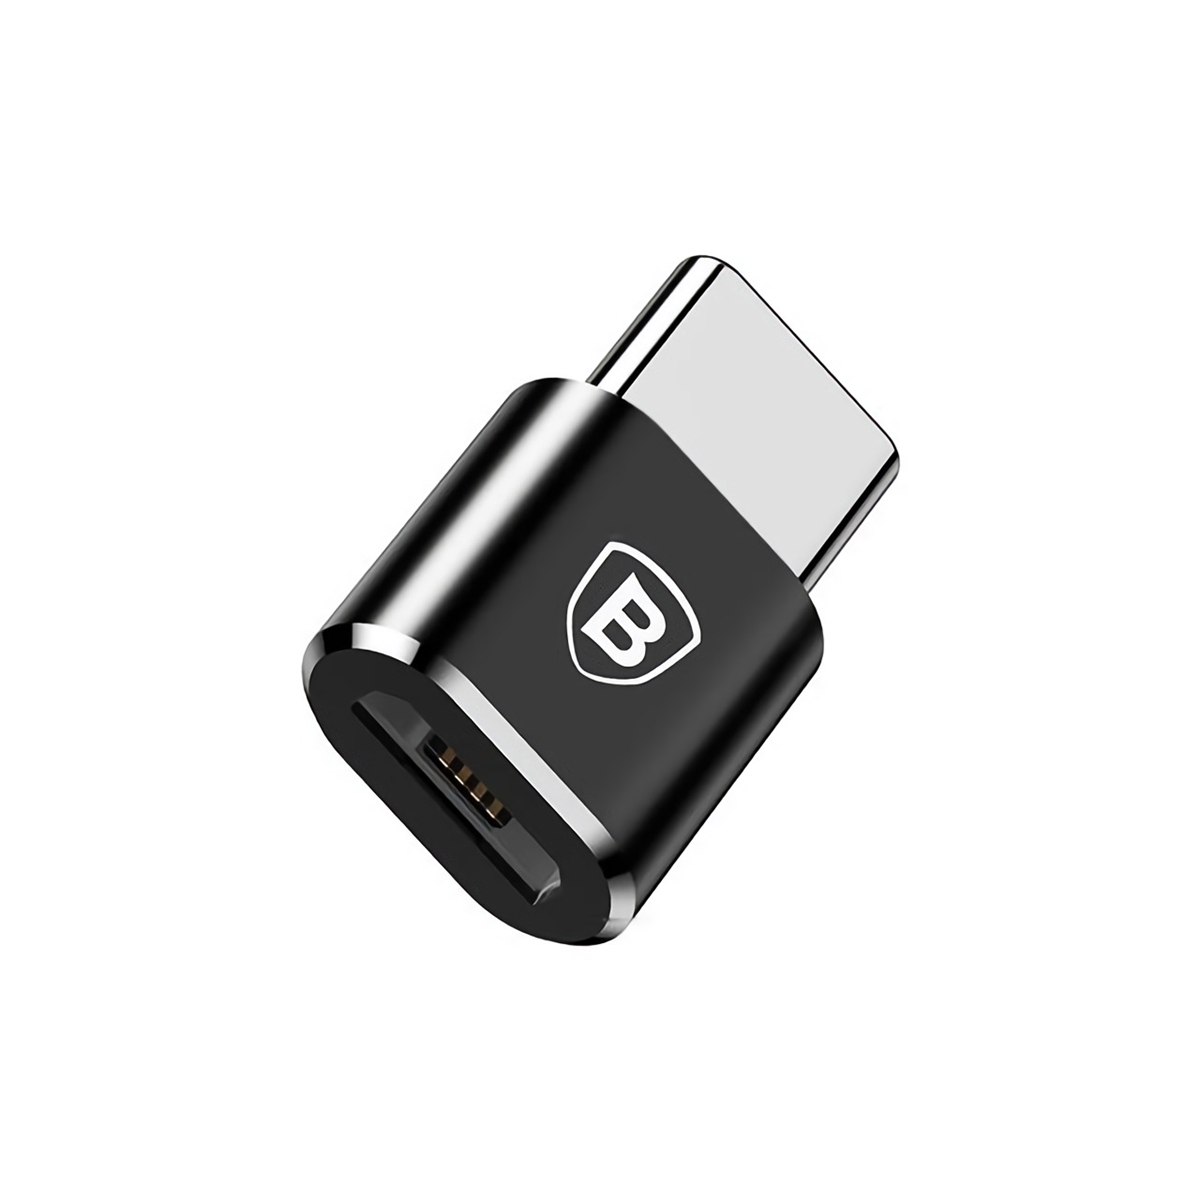 BASEUS Mini USB Female to Type-C Male Adapter USB-C OTG Adapter Micro Female to Type-C Male Adapter / Type-C Female to USB Male Adapter for Phone Tablet Laptop Computer